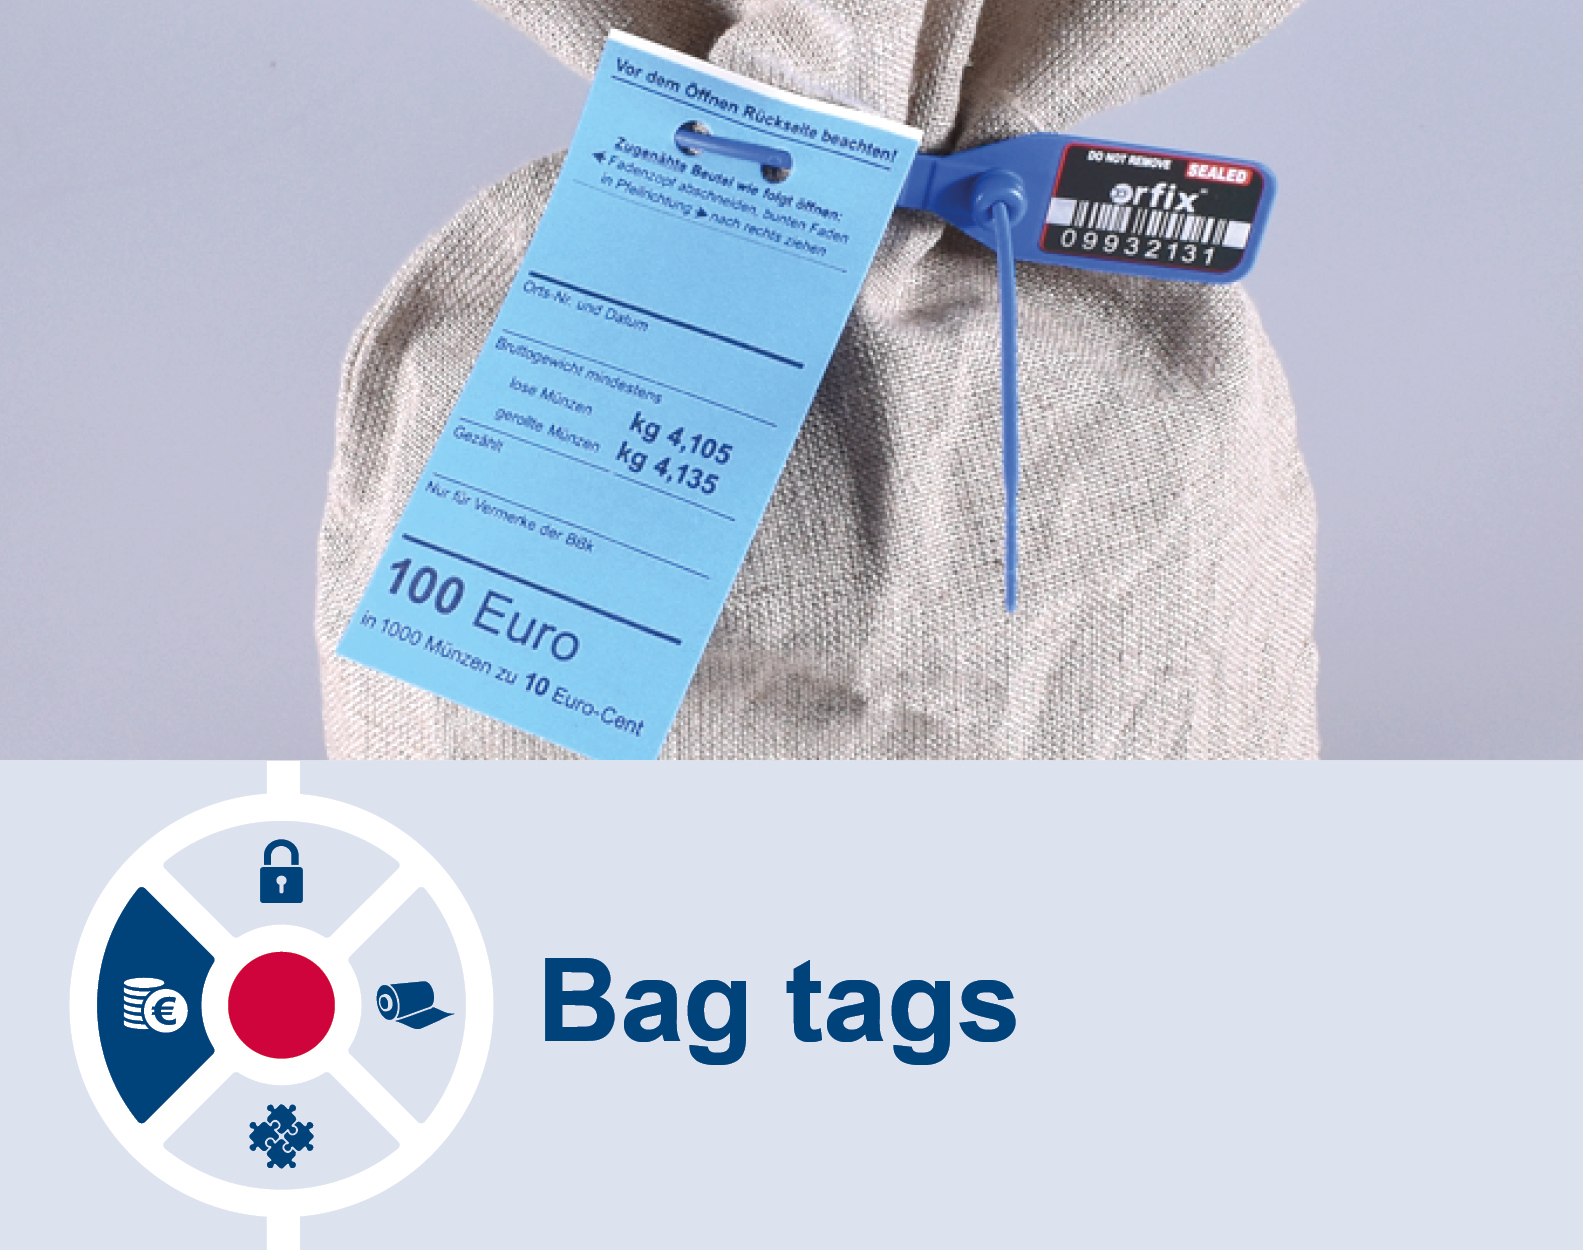 Label your coin bags with extratear proofed bag tags.